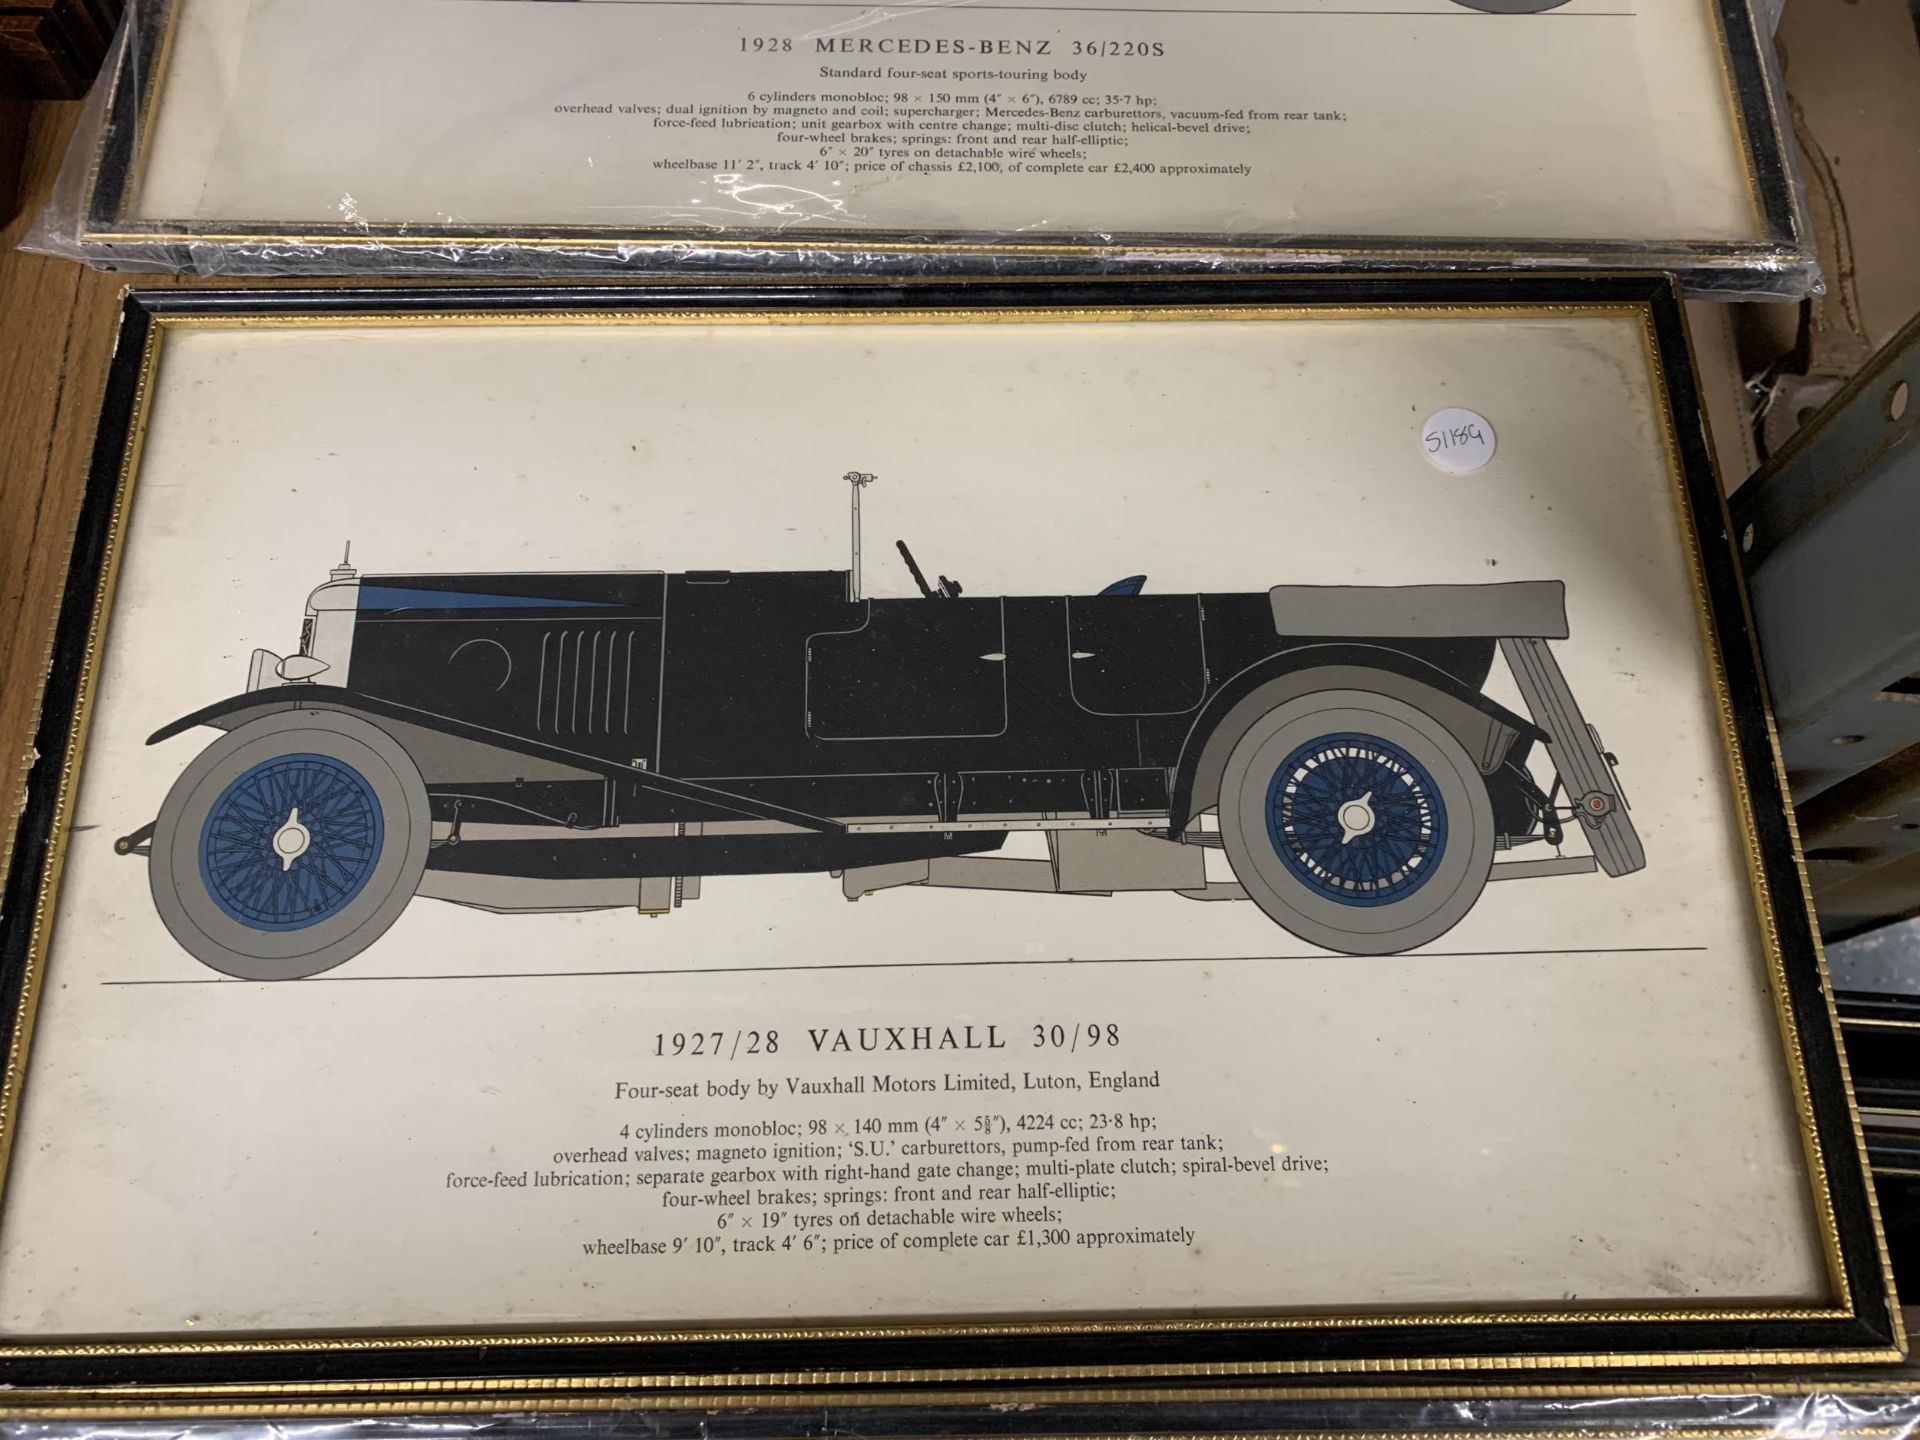 THREE FRAMED PRINTS OF VINTAGE CARS - 1926 BENTLEY 3 LITRE', 1927/28 VAUXHALL 30/98' AND '1928 - Image 4 of 6